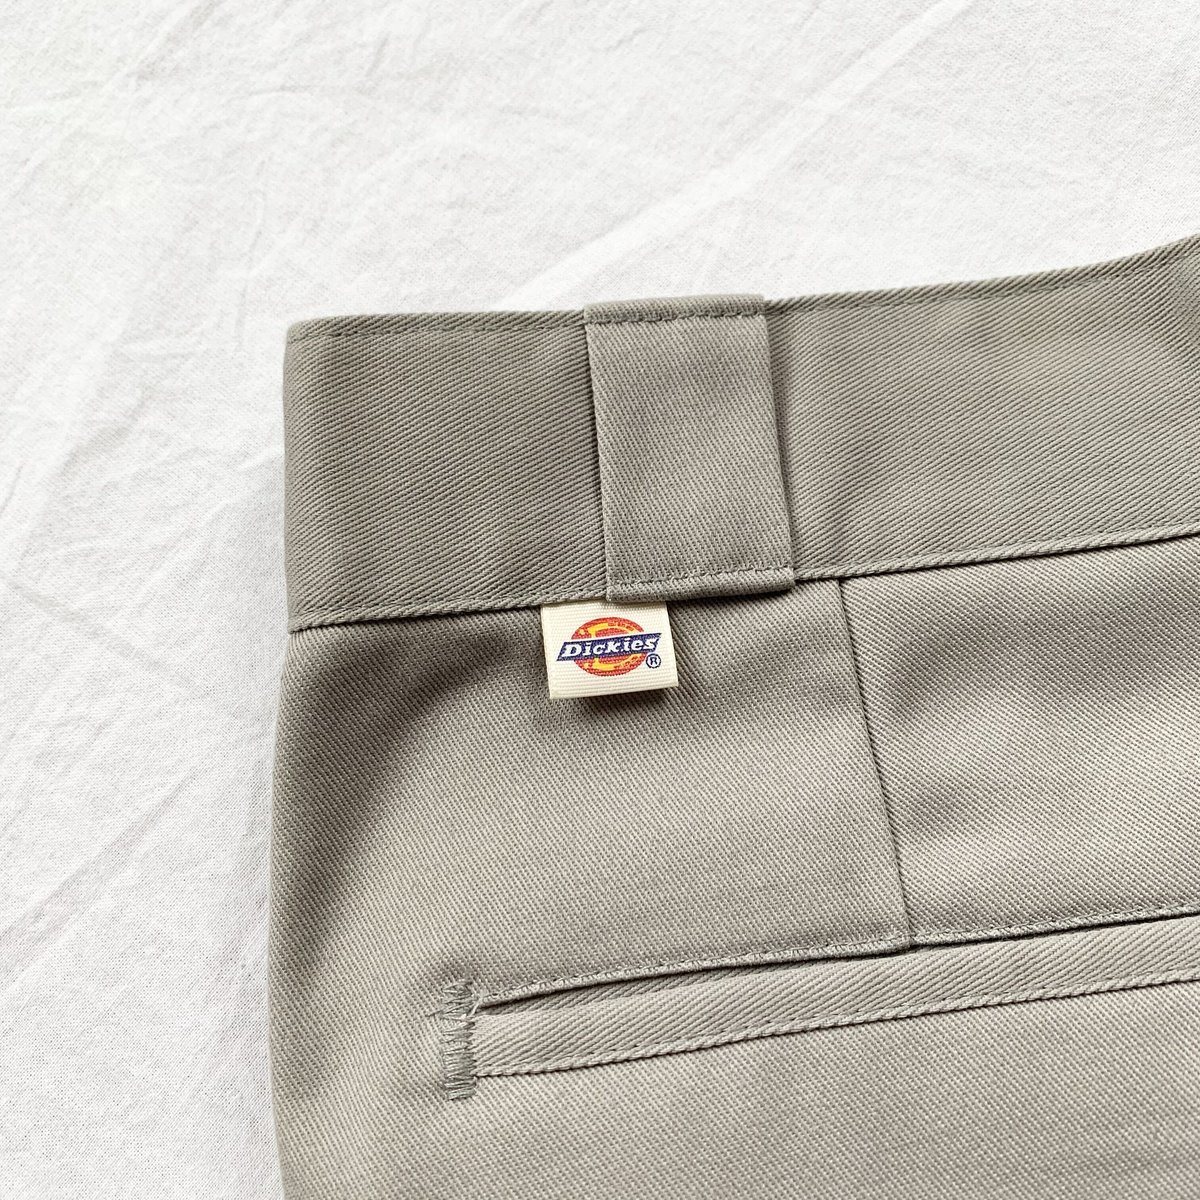 [W31 L34] Dickies 874 made in USA 80s deadstock...